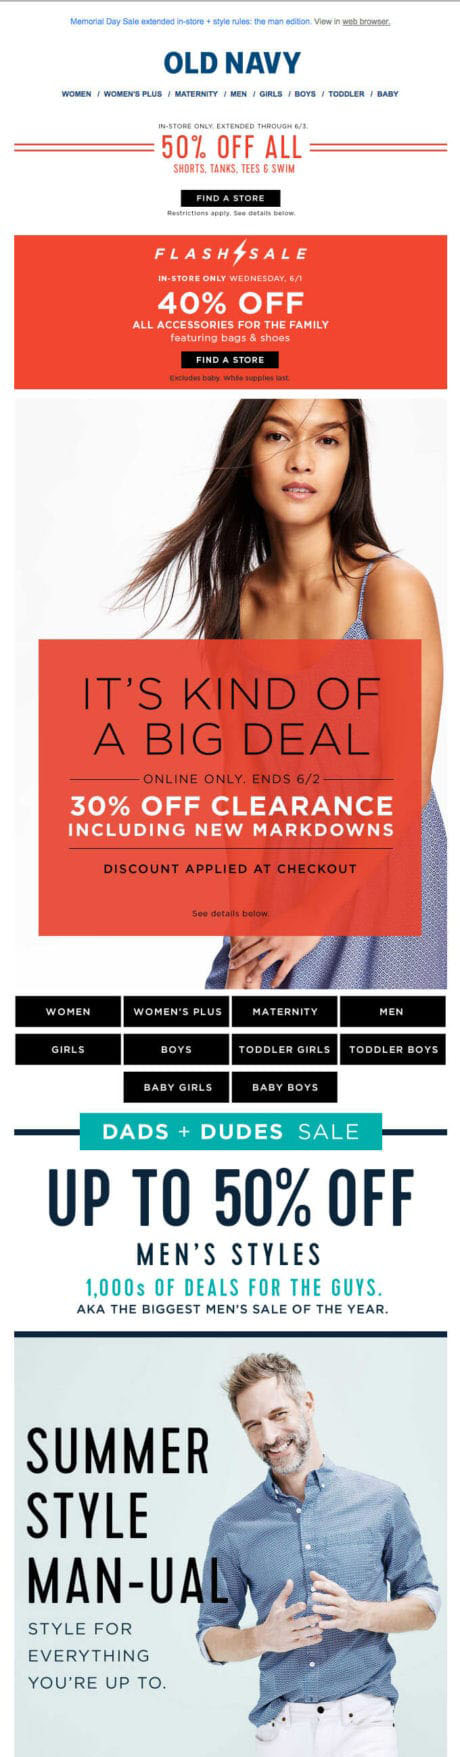 Promotional Emails - Special Offer Email Example - Old Navy